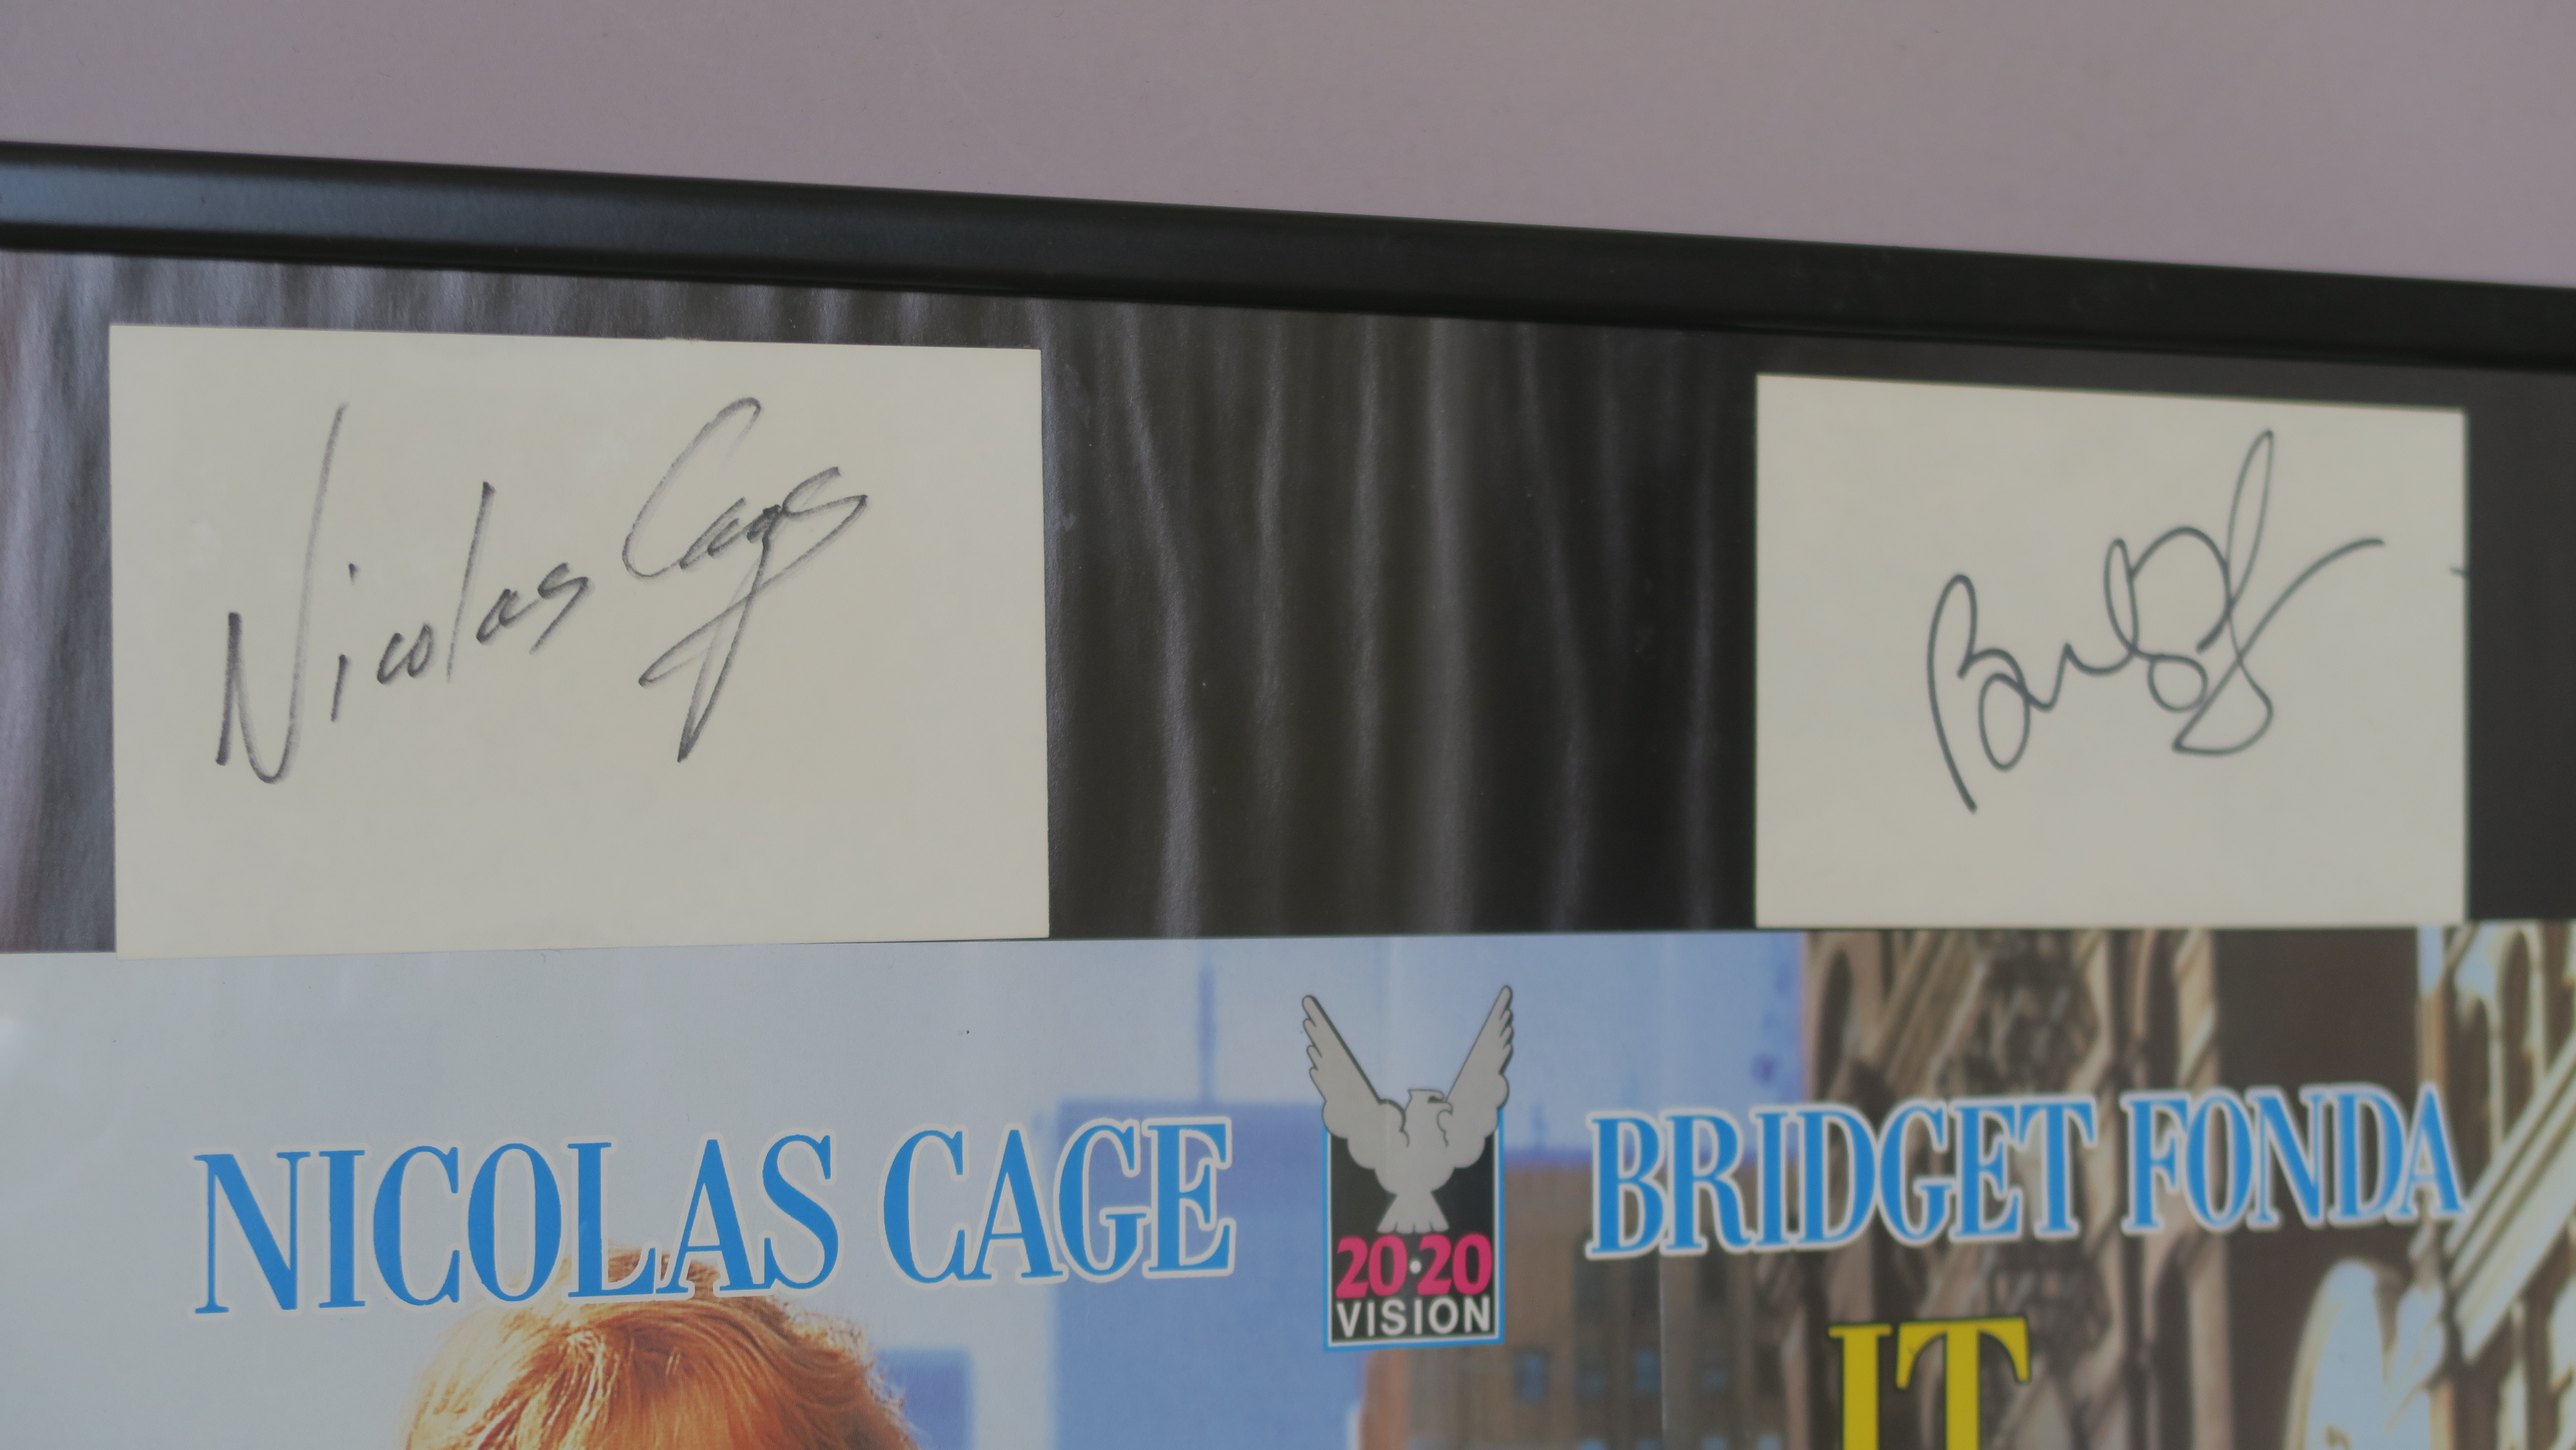 Nicholas Cage and Bridget Fonda autographs in frame with ''It Could happen to you'' starring Cage - Image 2 of 2